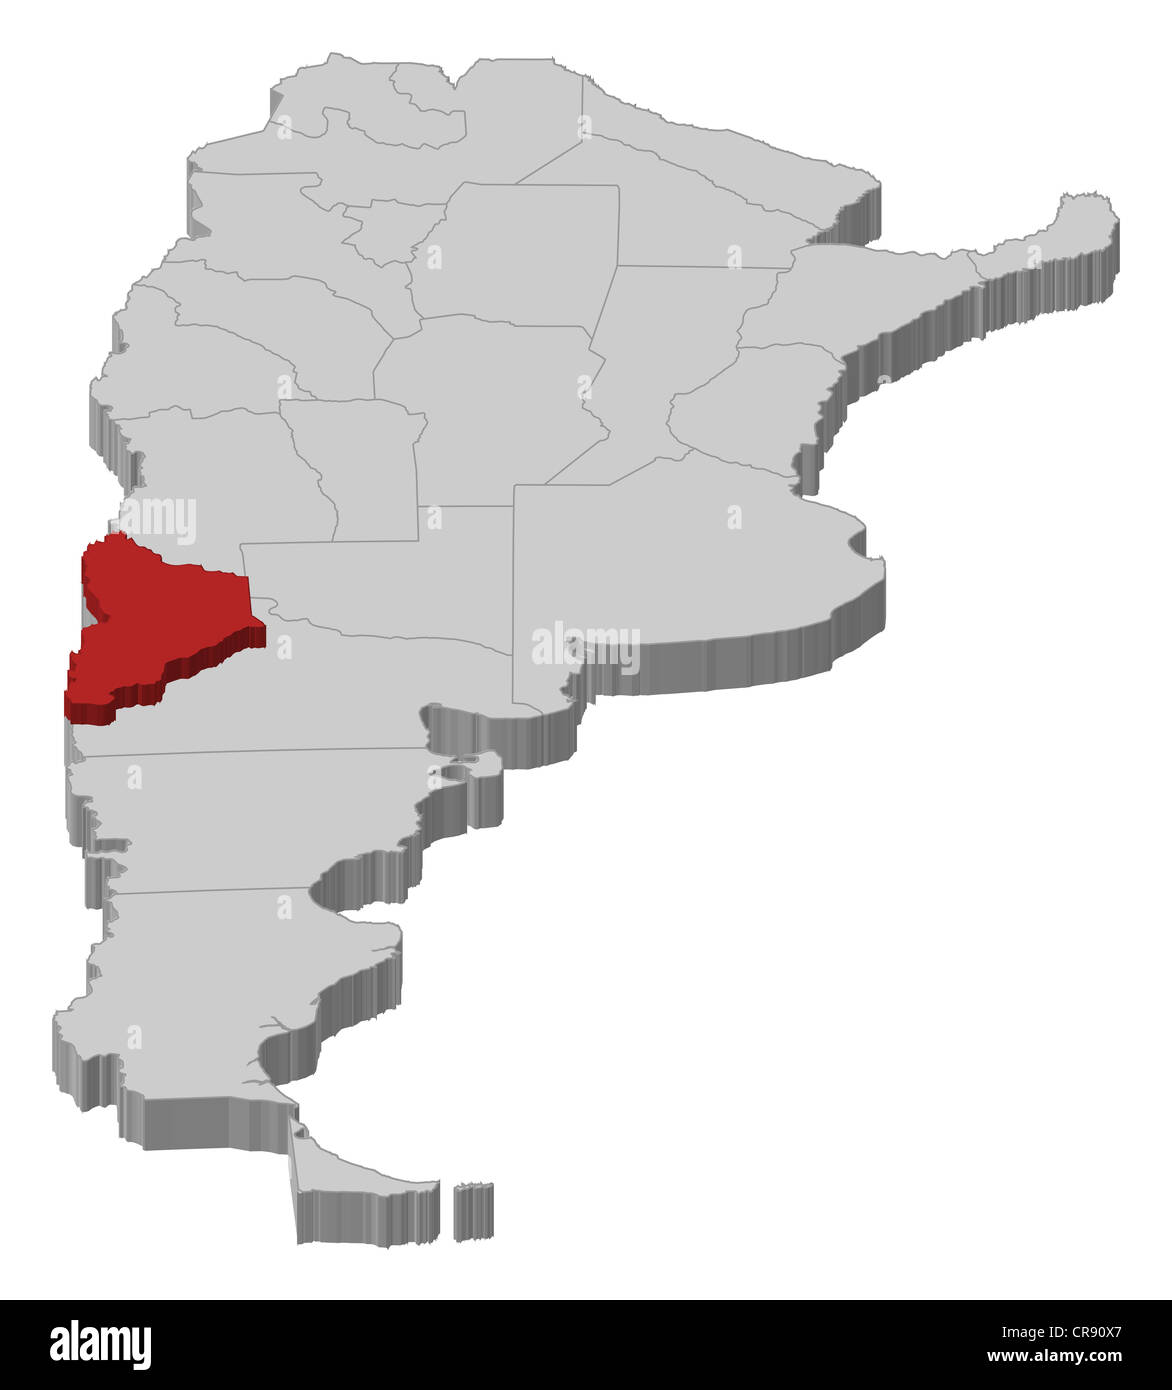 A map of Chili, Patagonia, La Plata and ye south part of Brasil